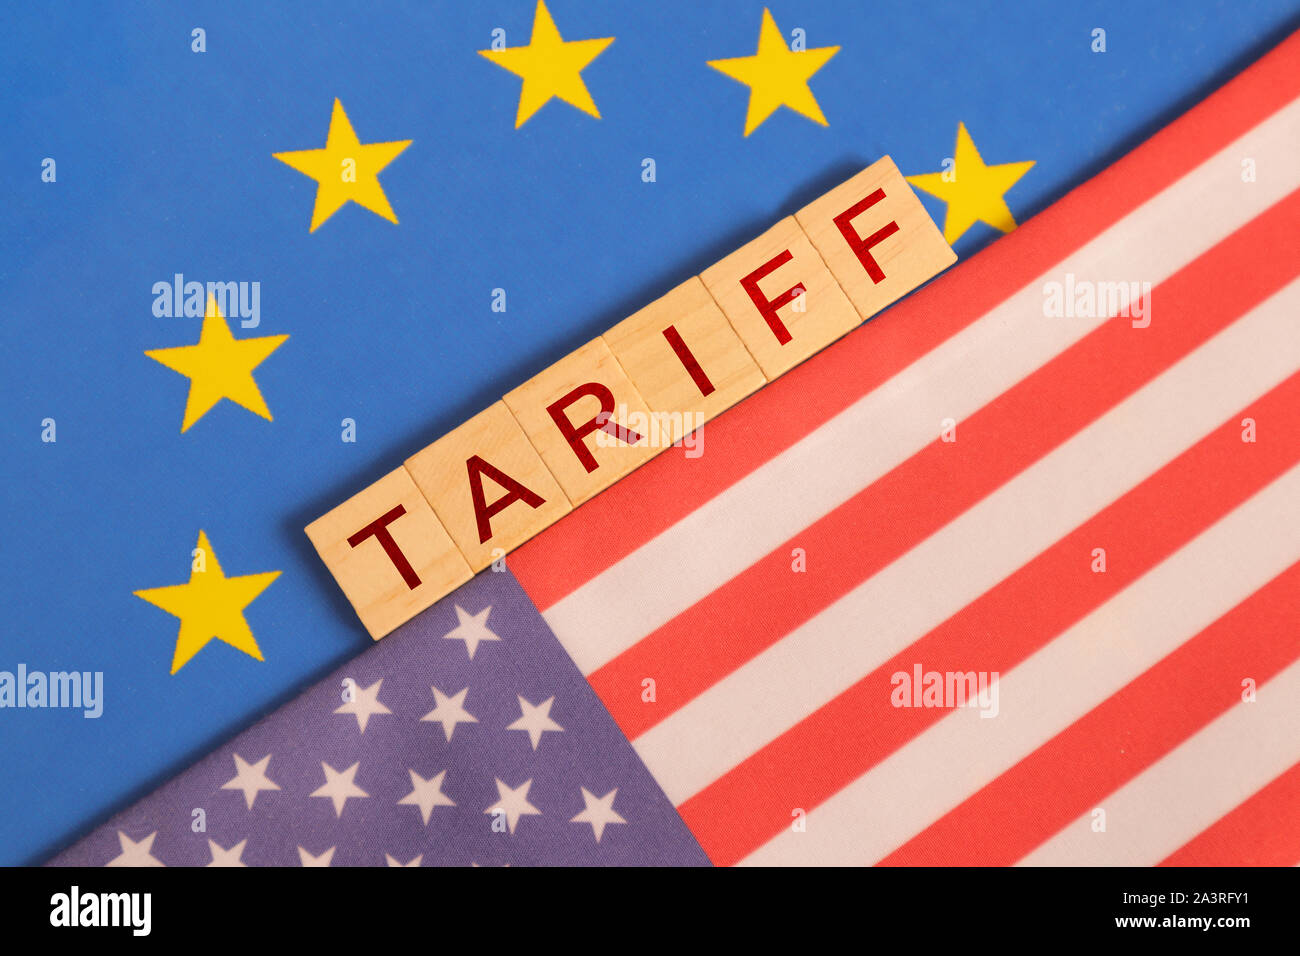 Concept of Bilateral relations and US tariff on EU showing with flags. Stock Photo